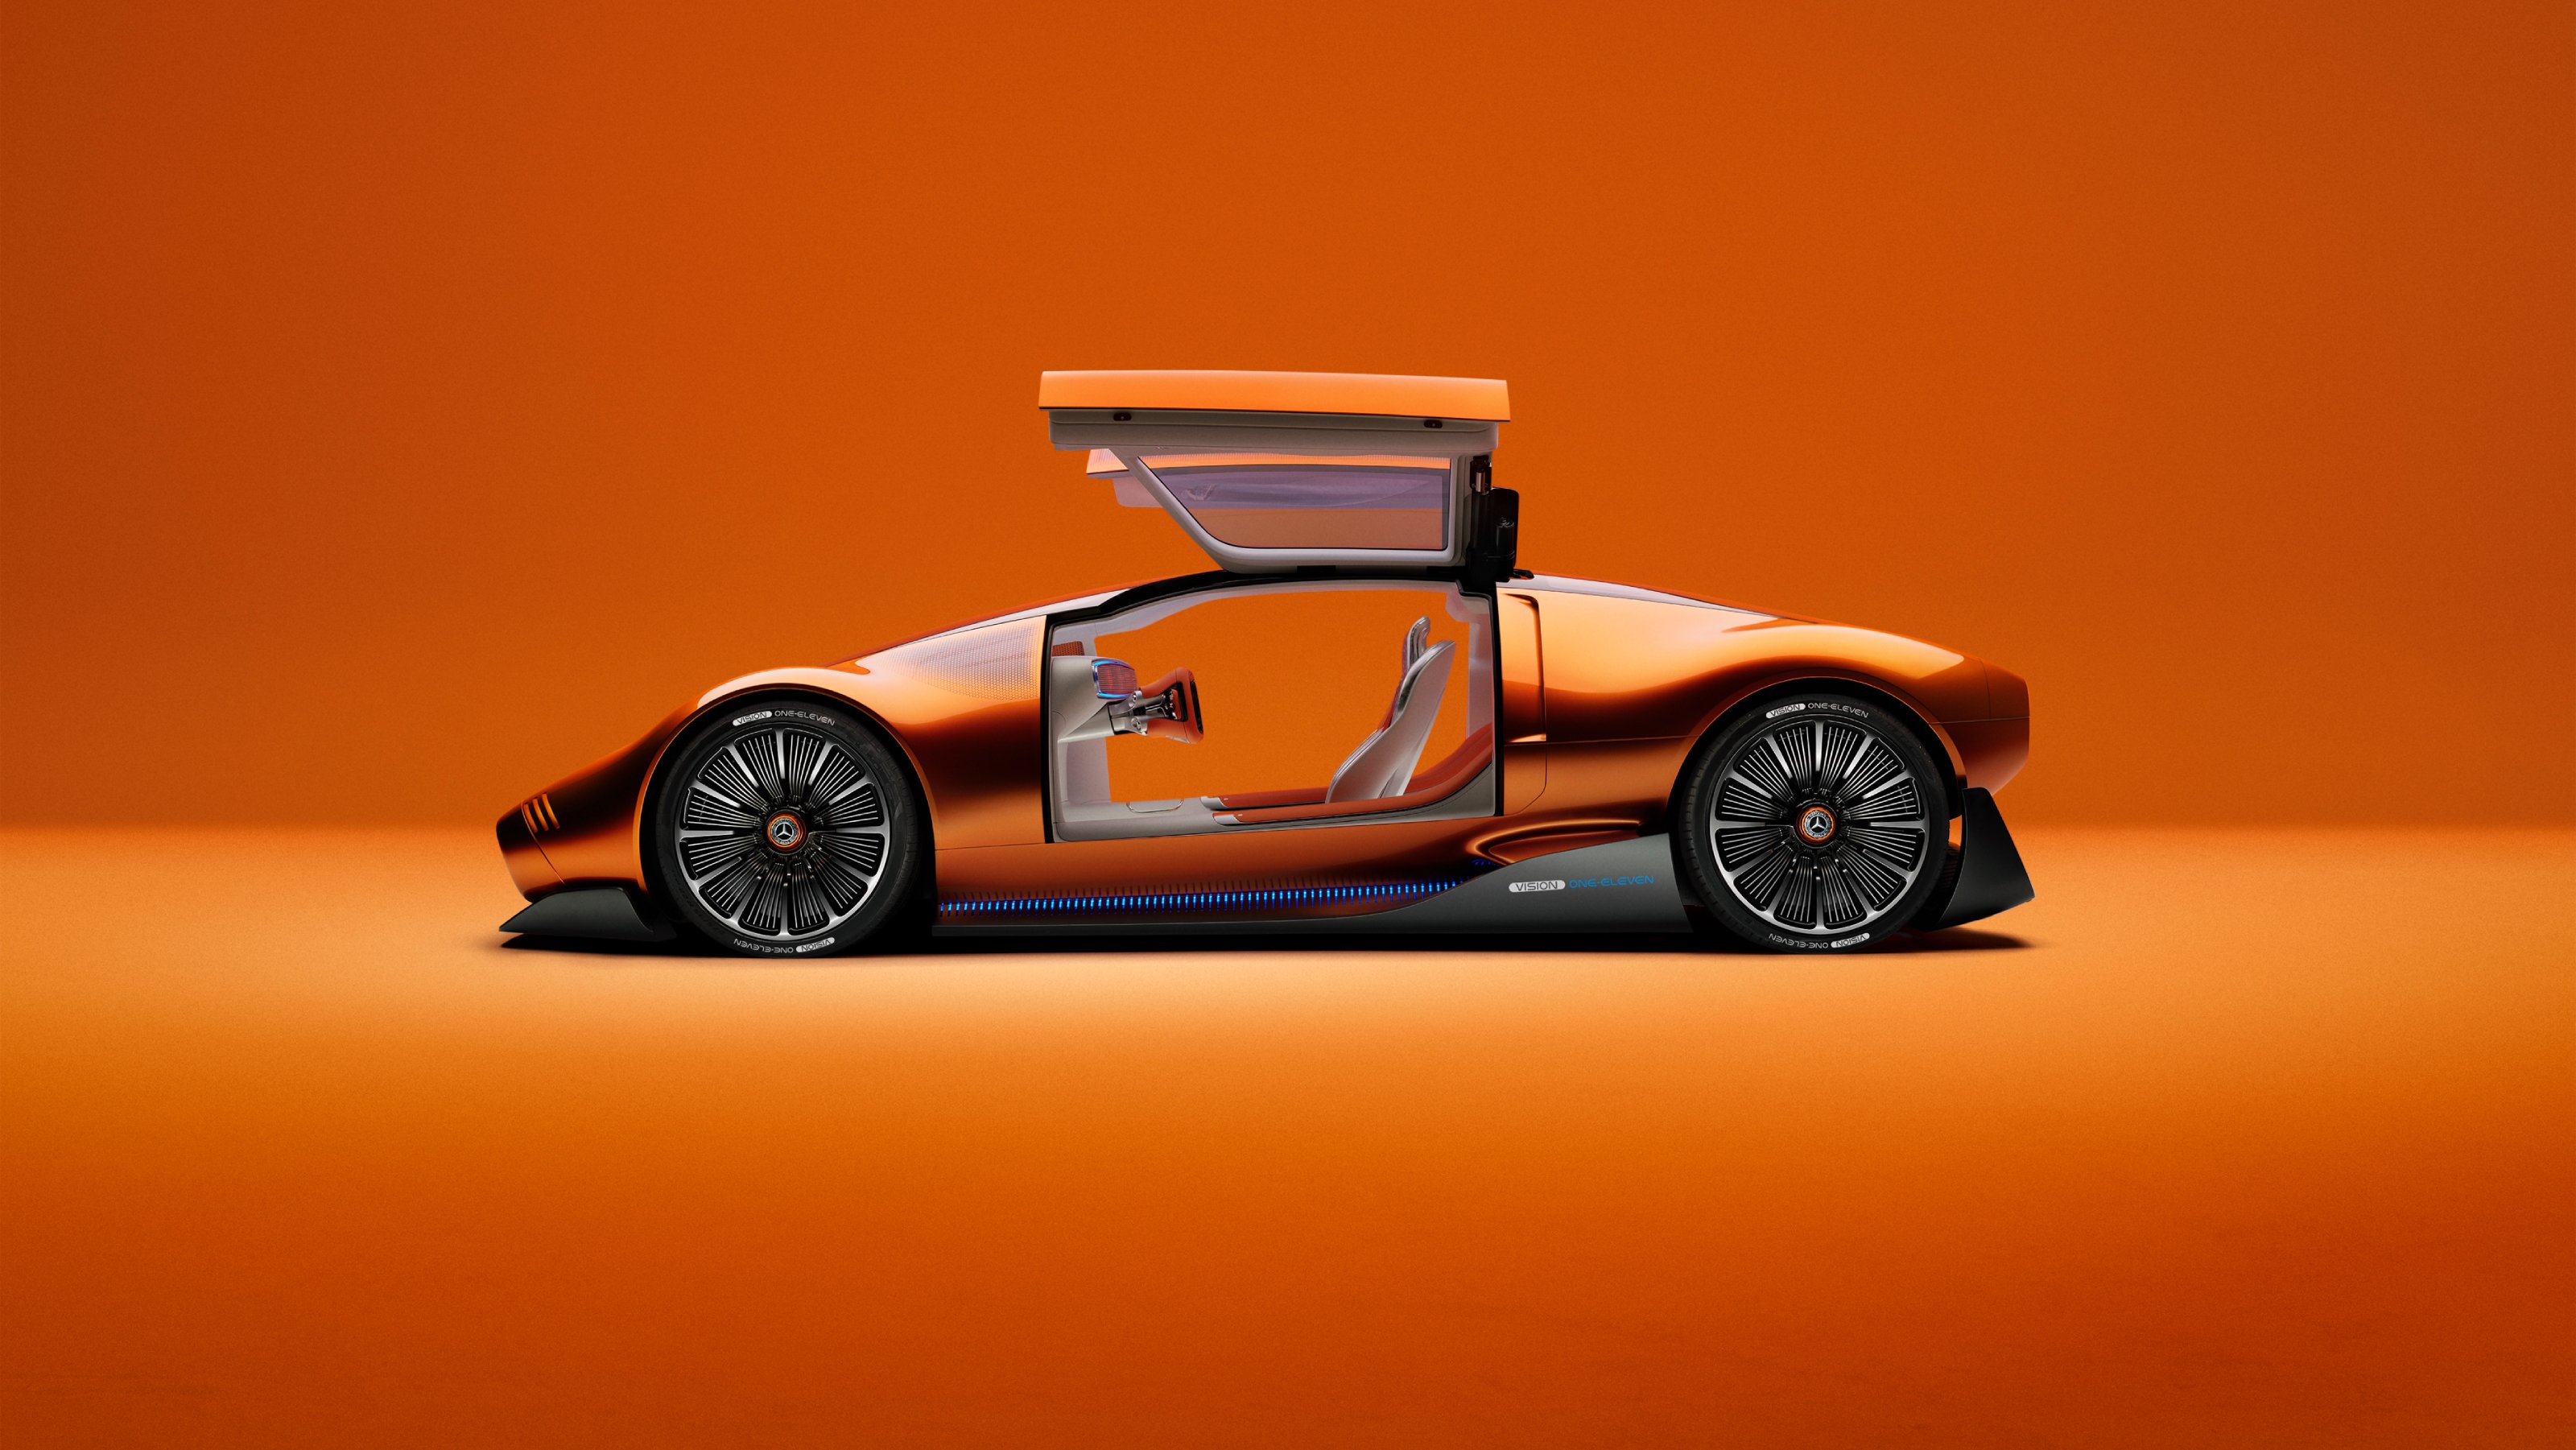 Virgil Abloh and Mercedes link-up again for electric show car concept